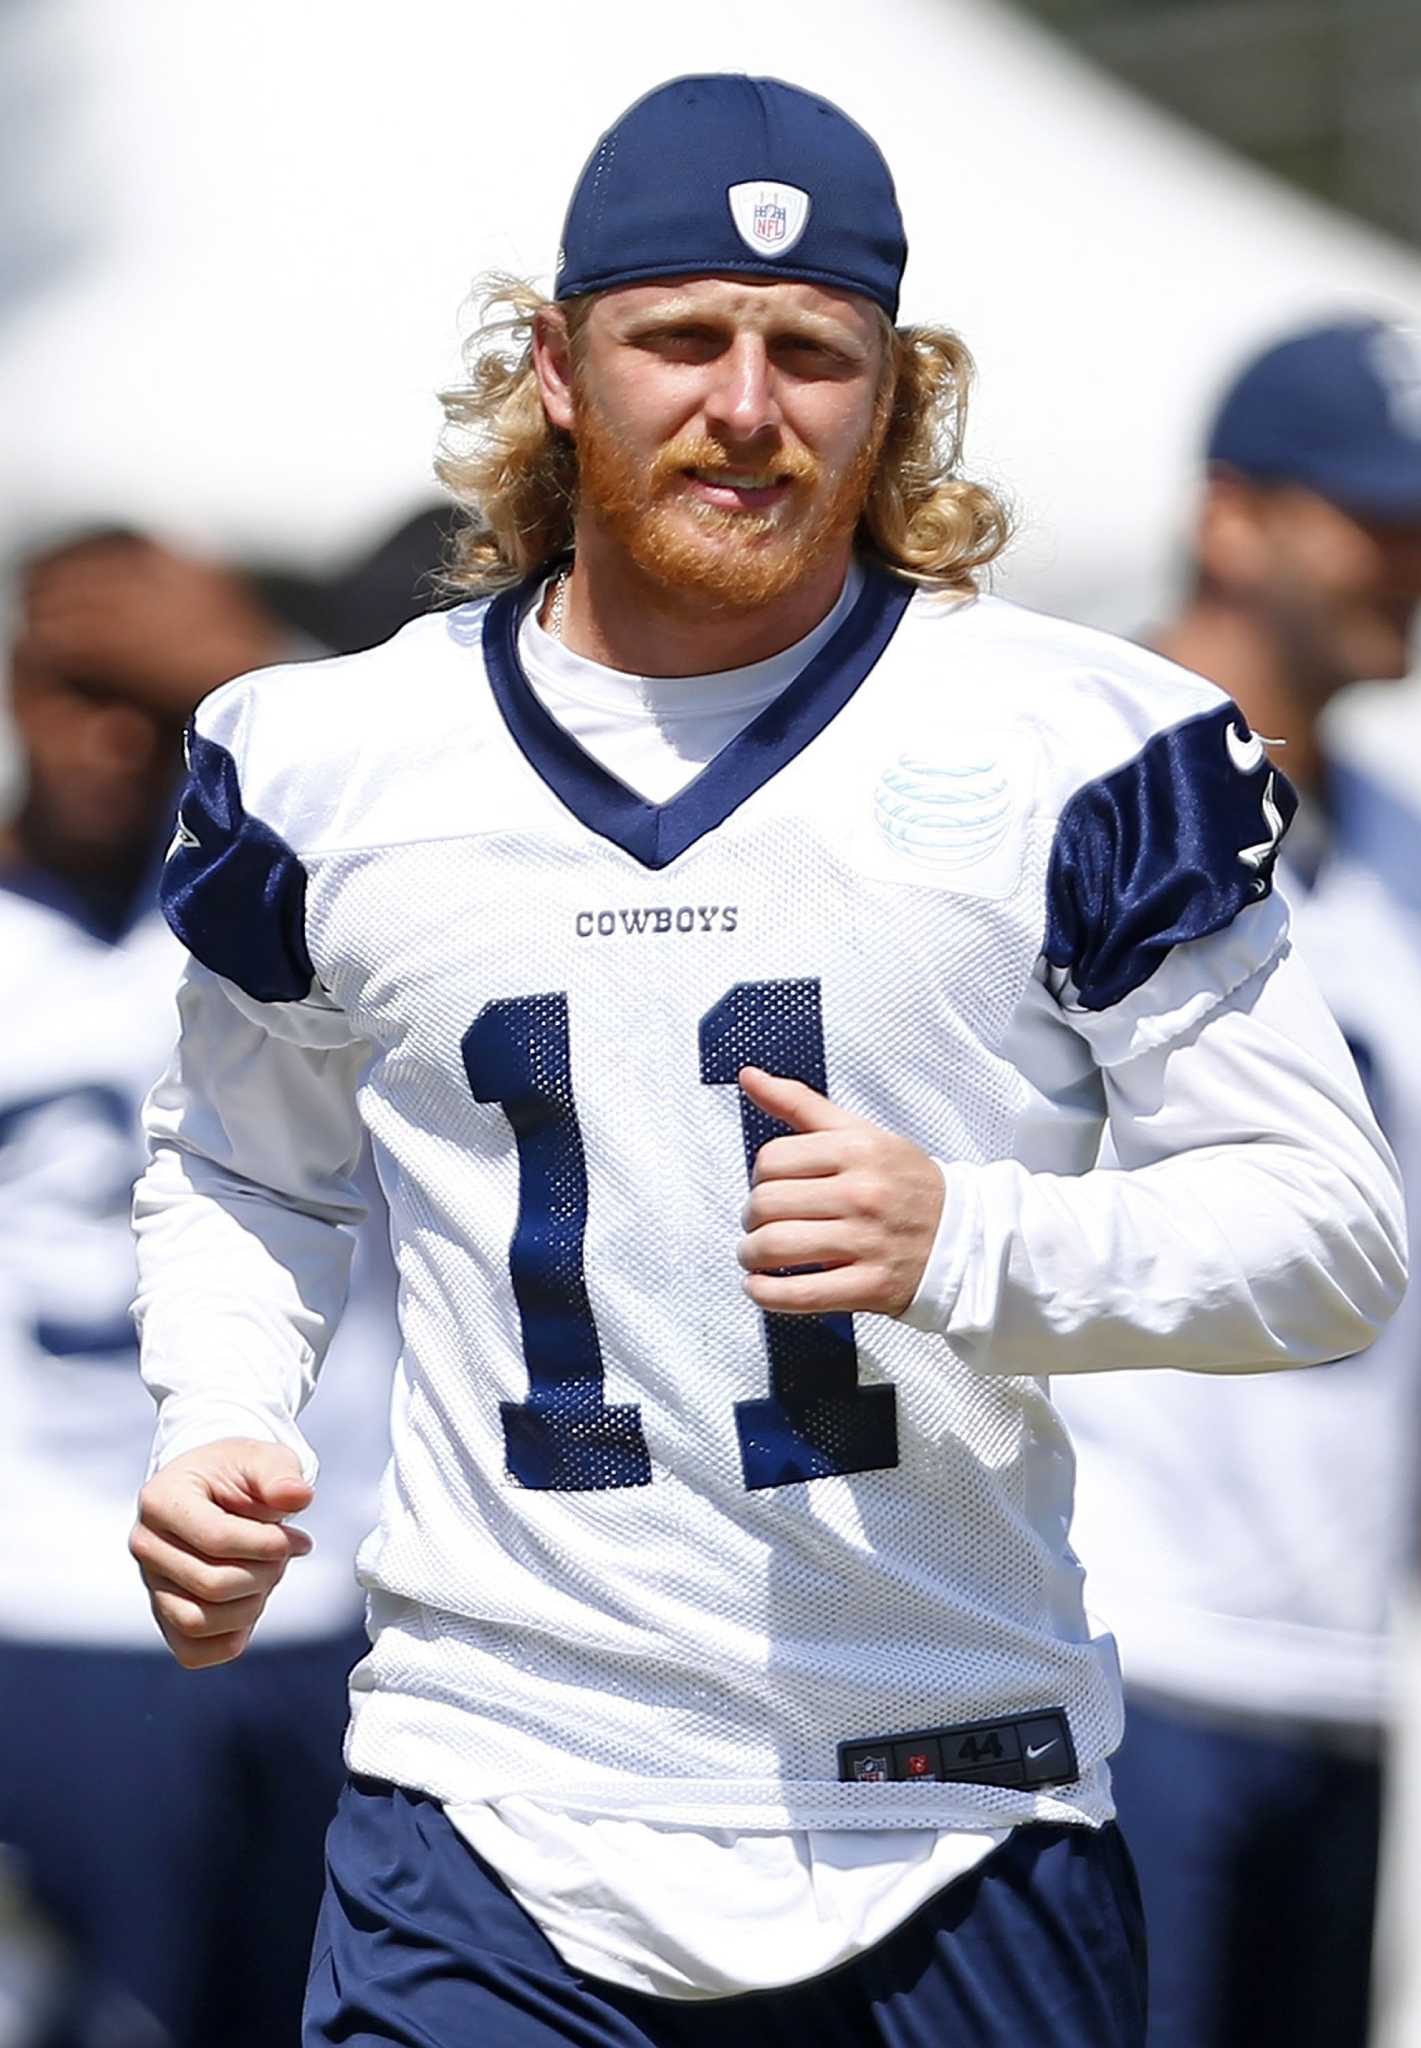 number 11 for the dallas cowboys